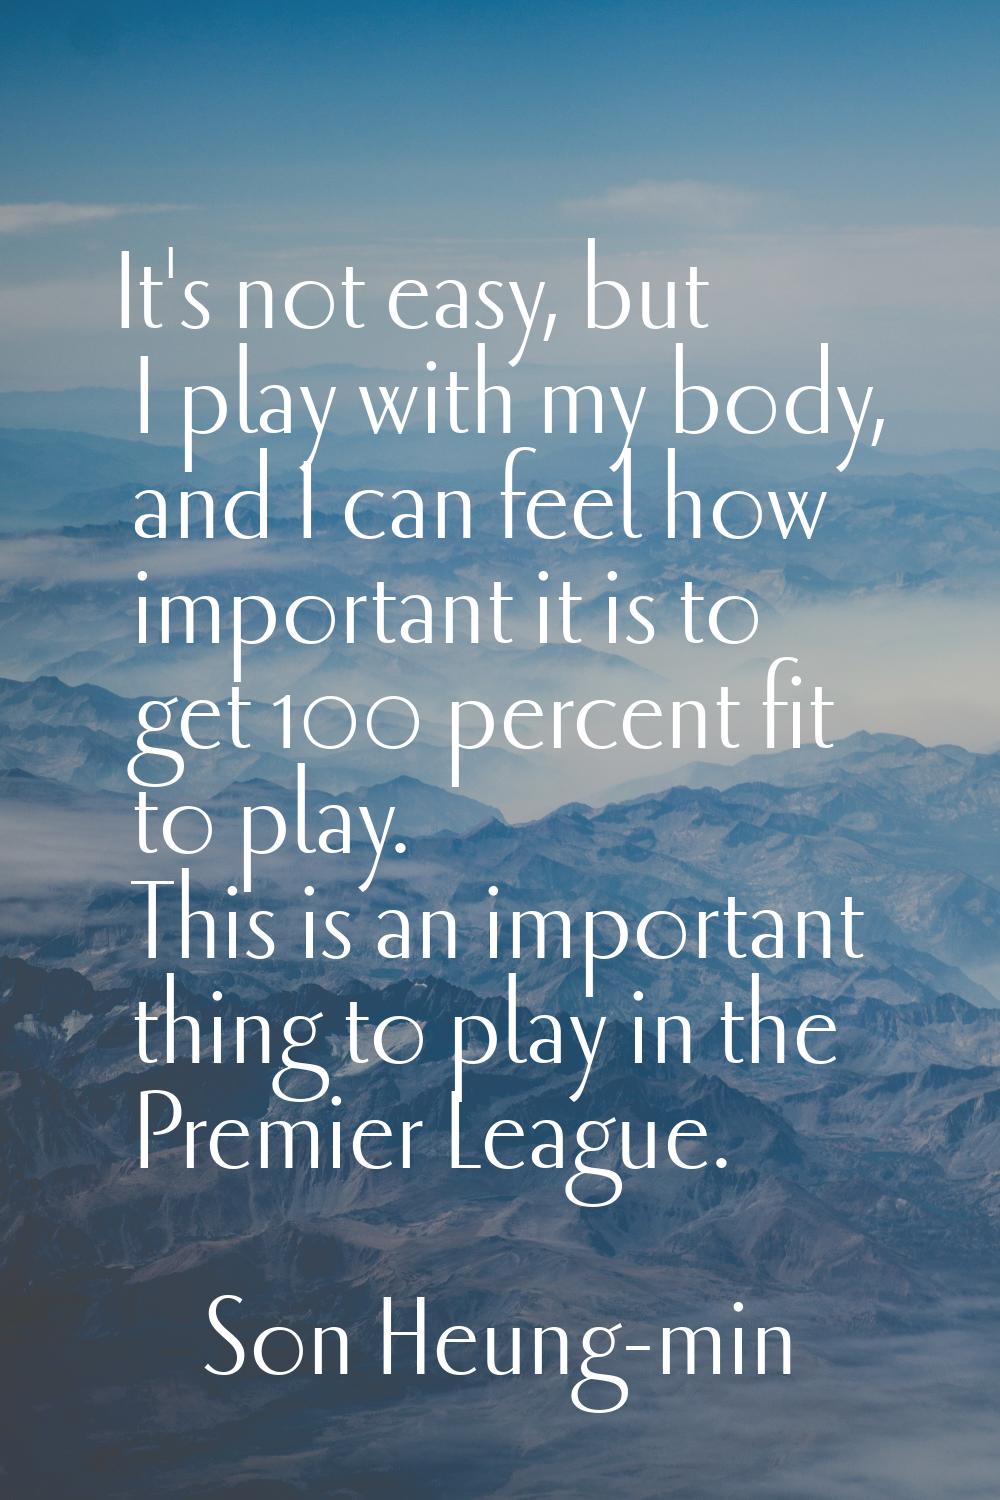 It's not easy, but I play with my body, and I can feel how important it is to get 100 percent fit t